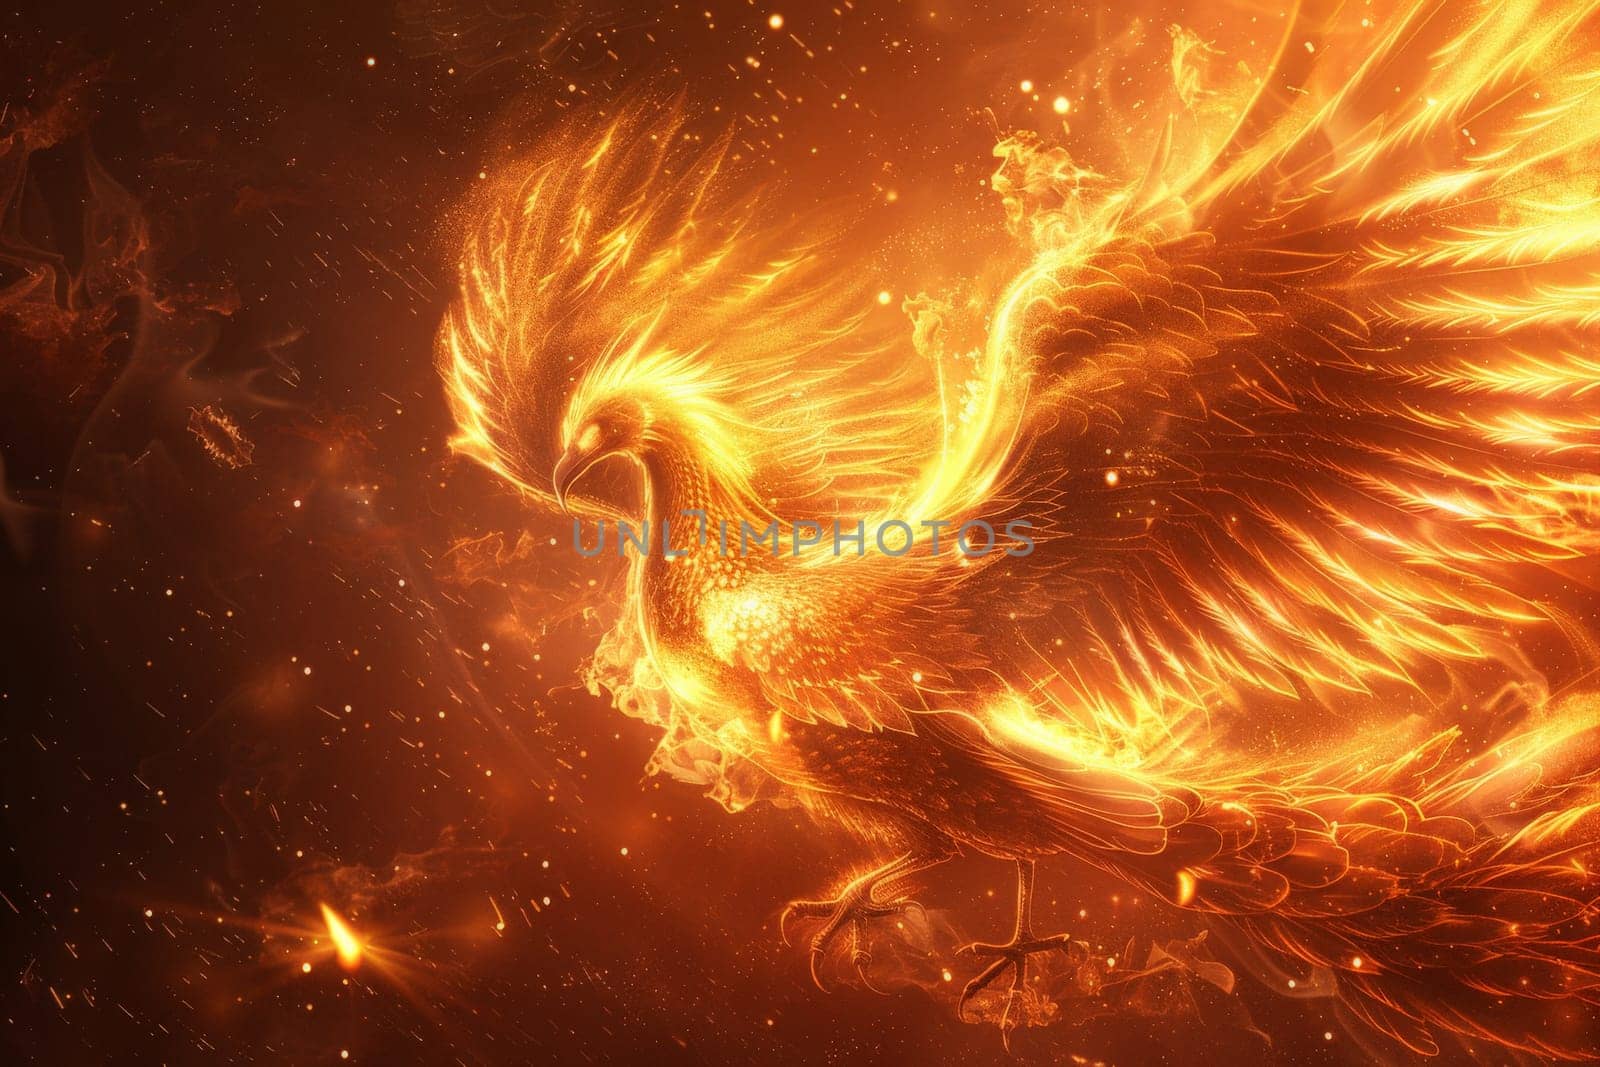 A fiery bird with its wings spread wide, soaring through the sky. Concept of freedom and power, as the bird's vibrant colors and majestic wingspan create a striking visual